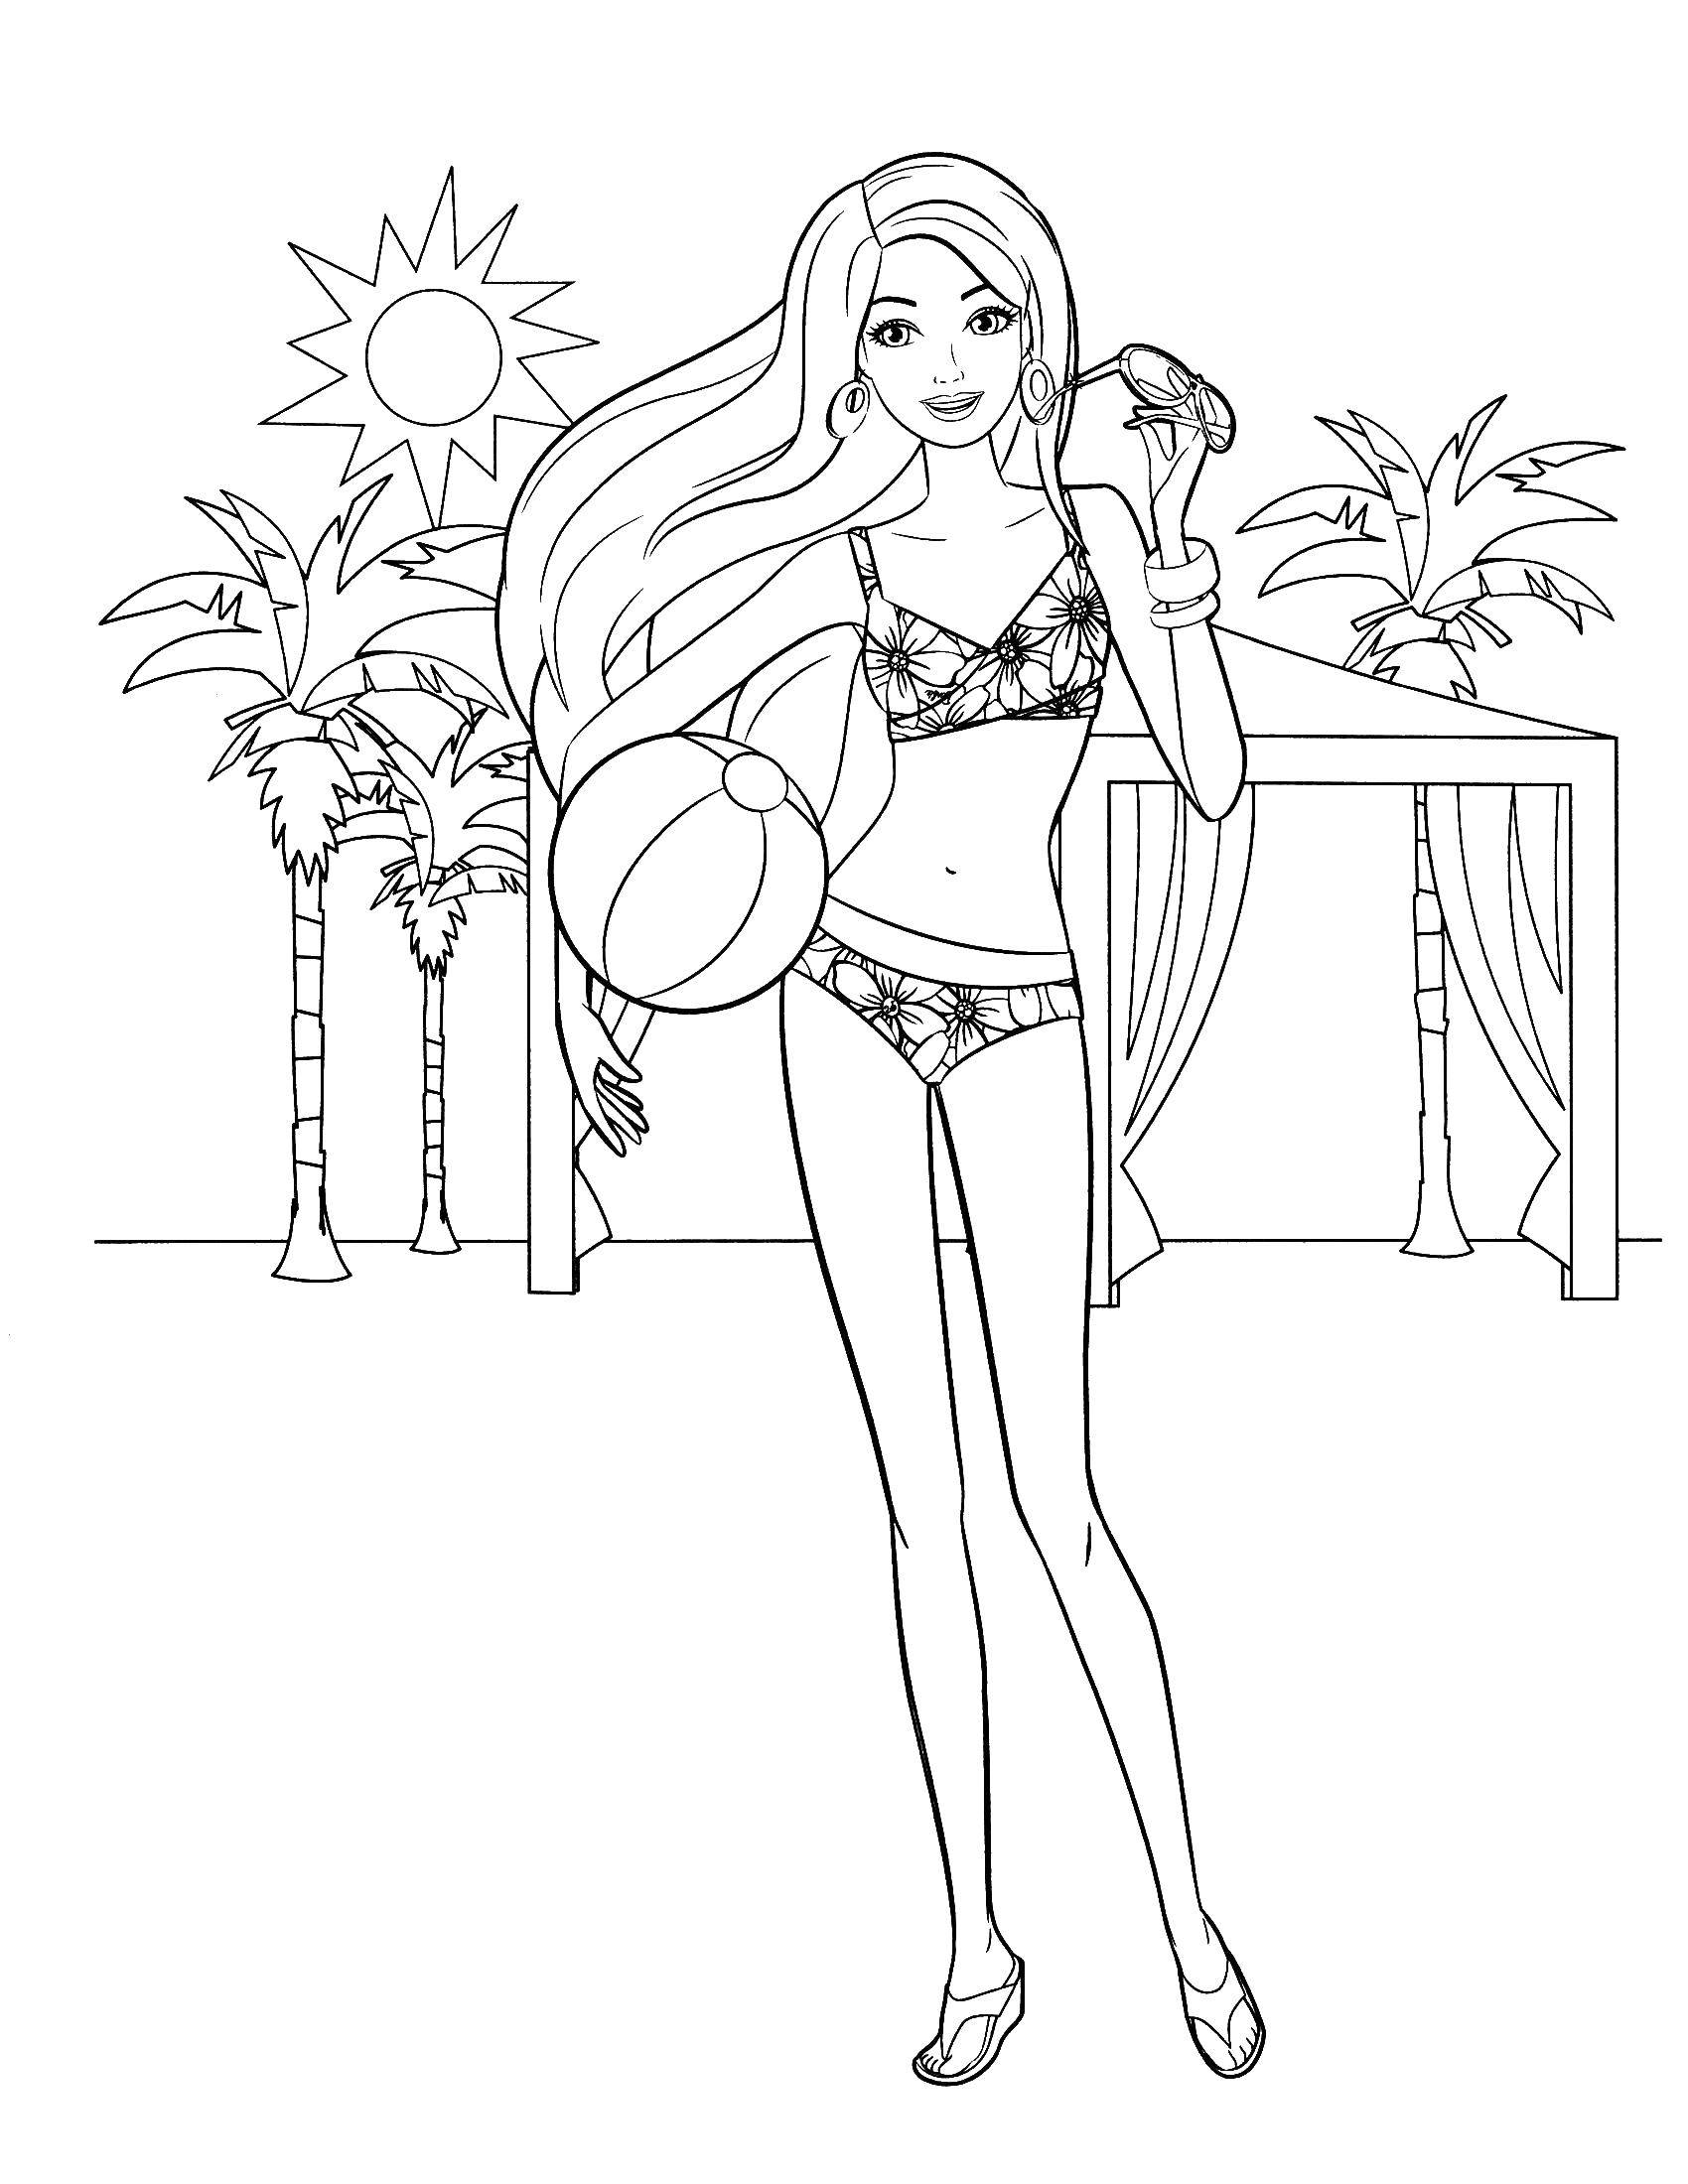 Coloring Barbie in a swimsuit on the beach. Category ladies. Tags:  Barbie , swimsuit, beach.